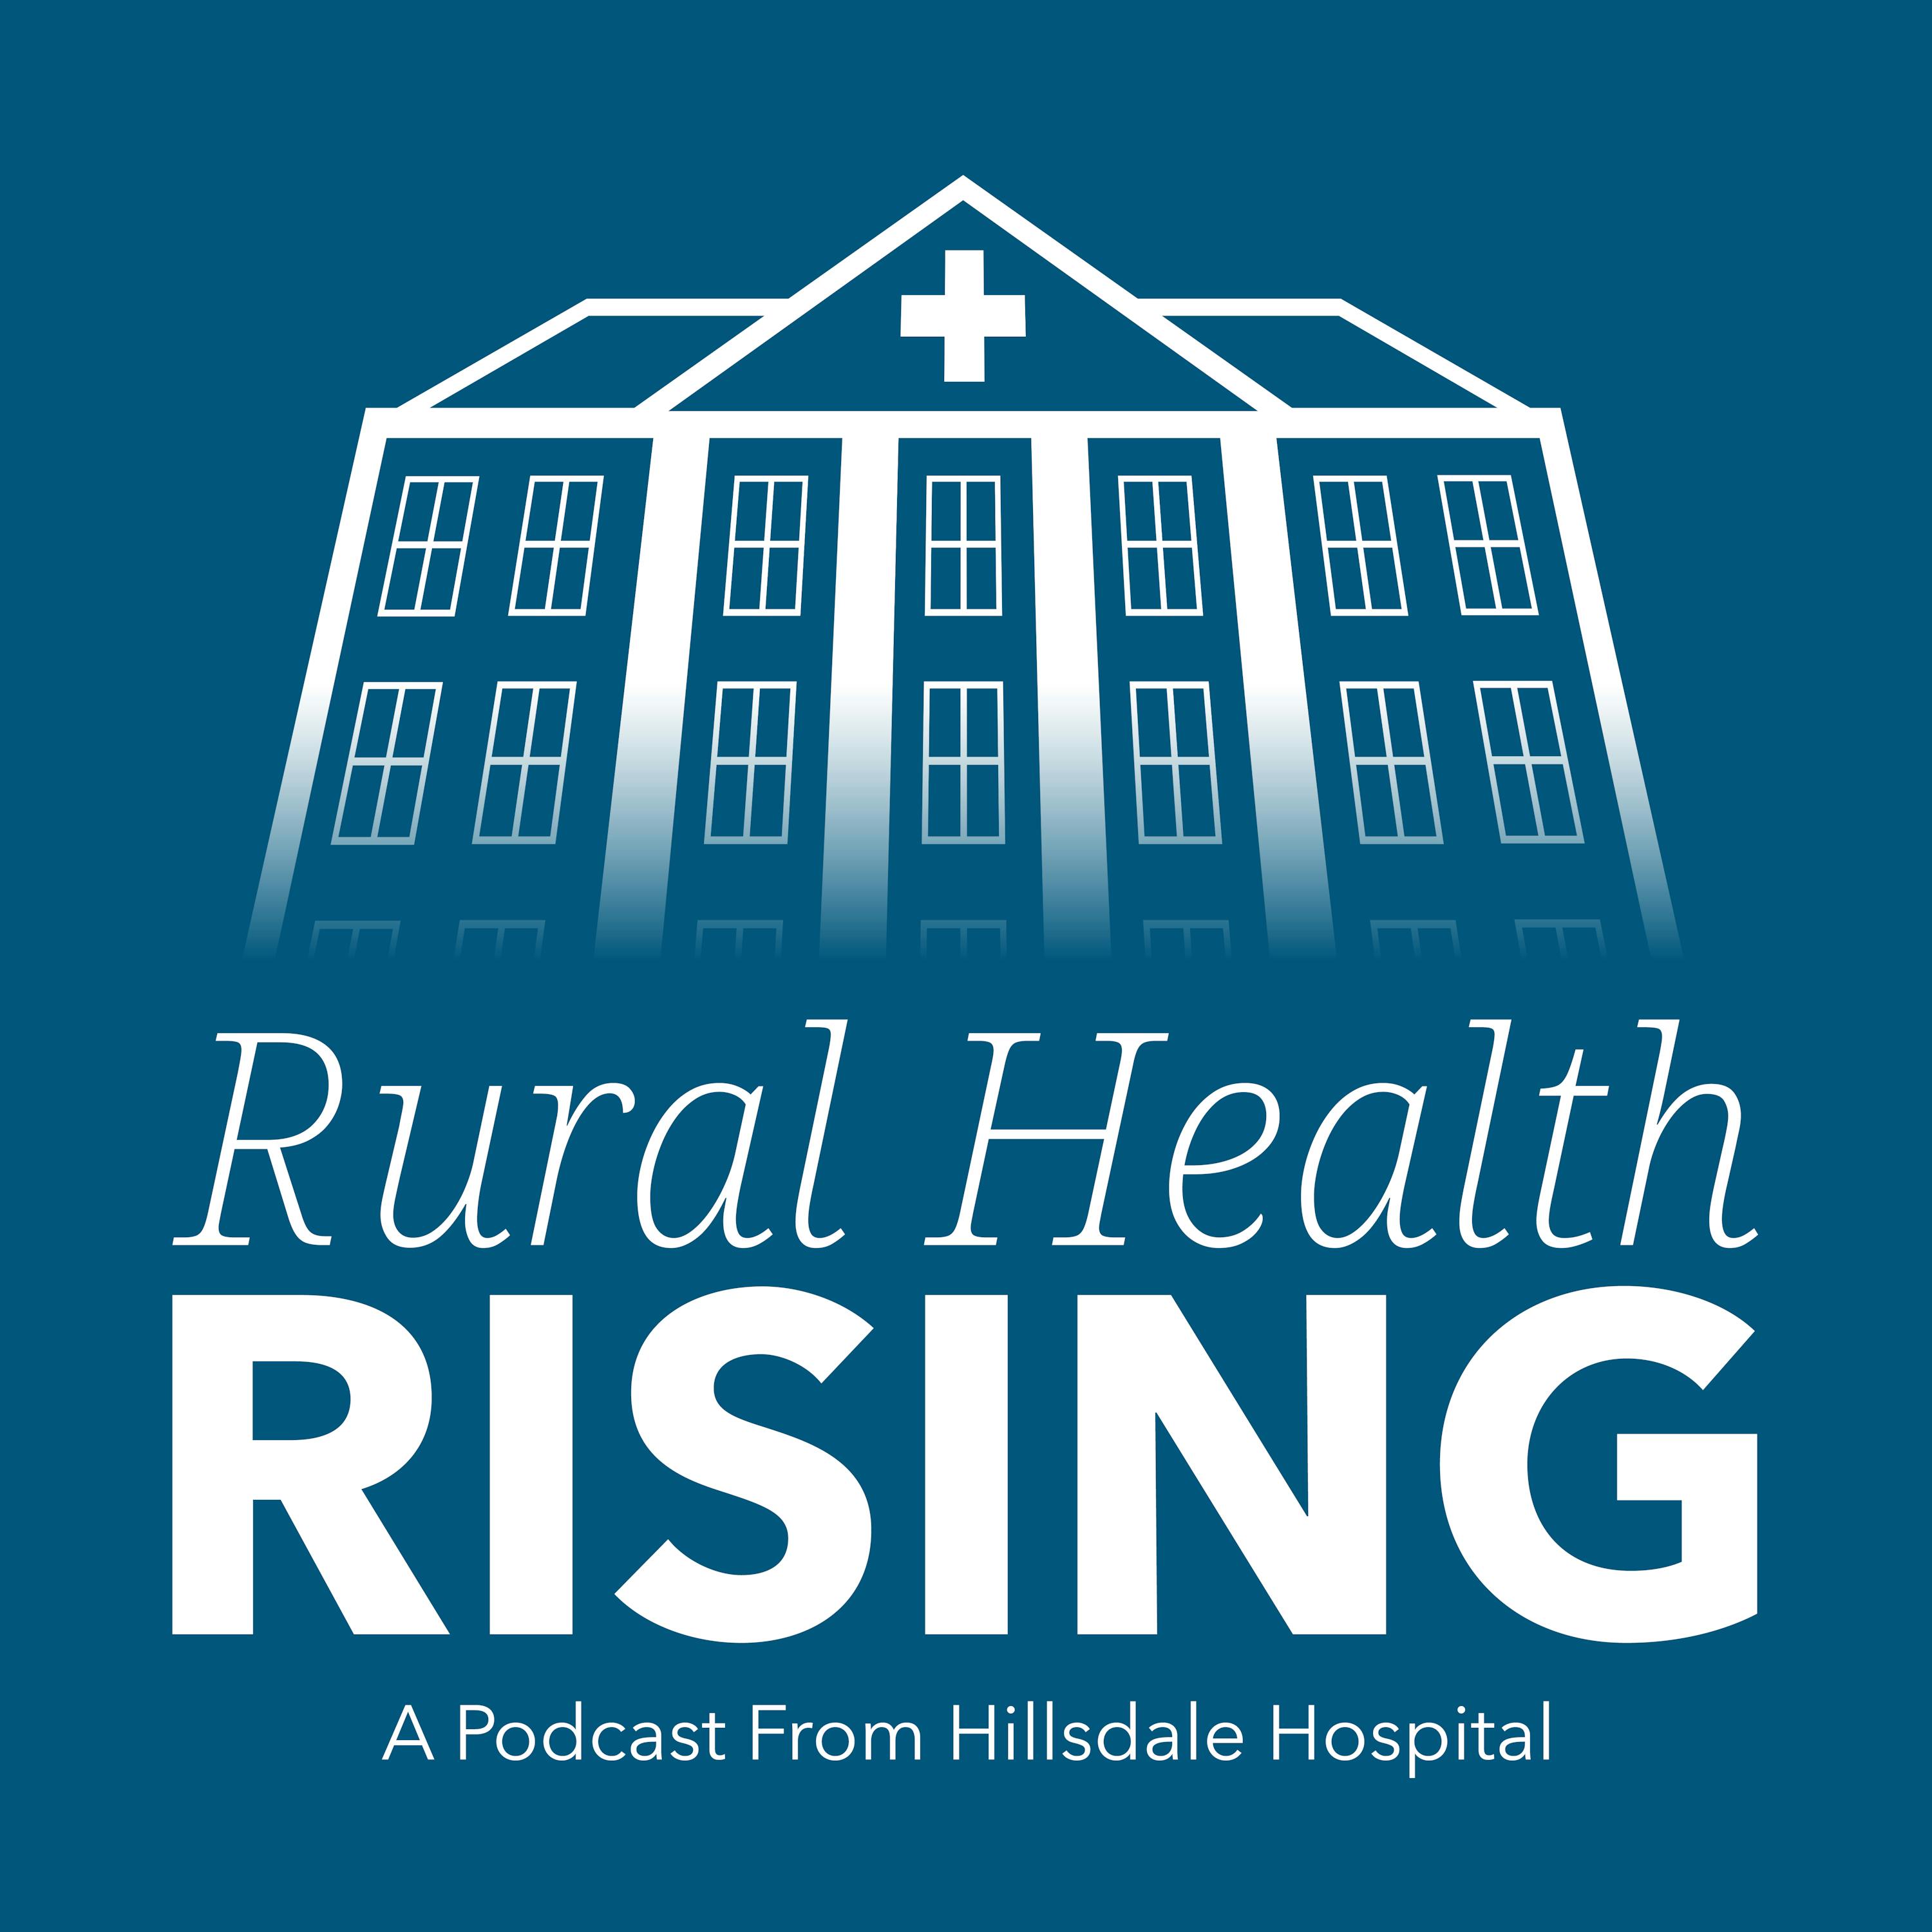 Episode 143: Rural Health Road Trip: The Old Line State